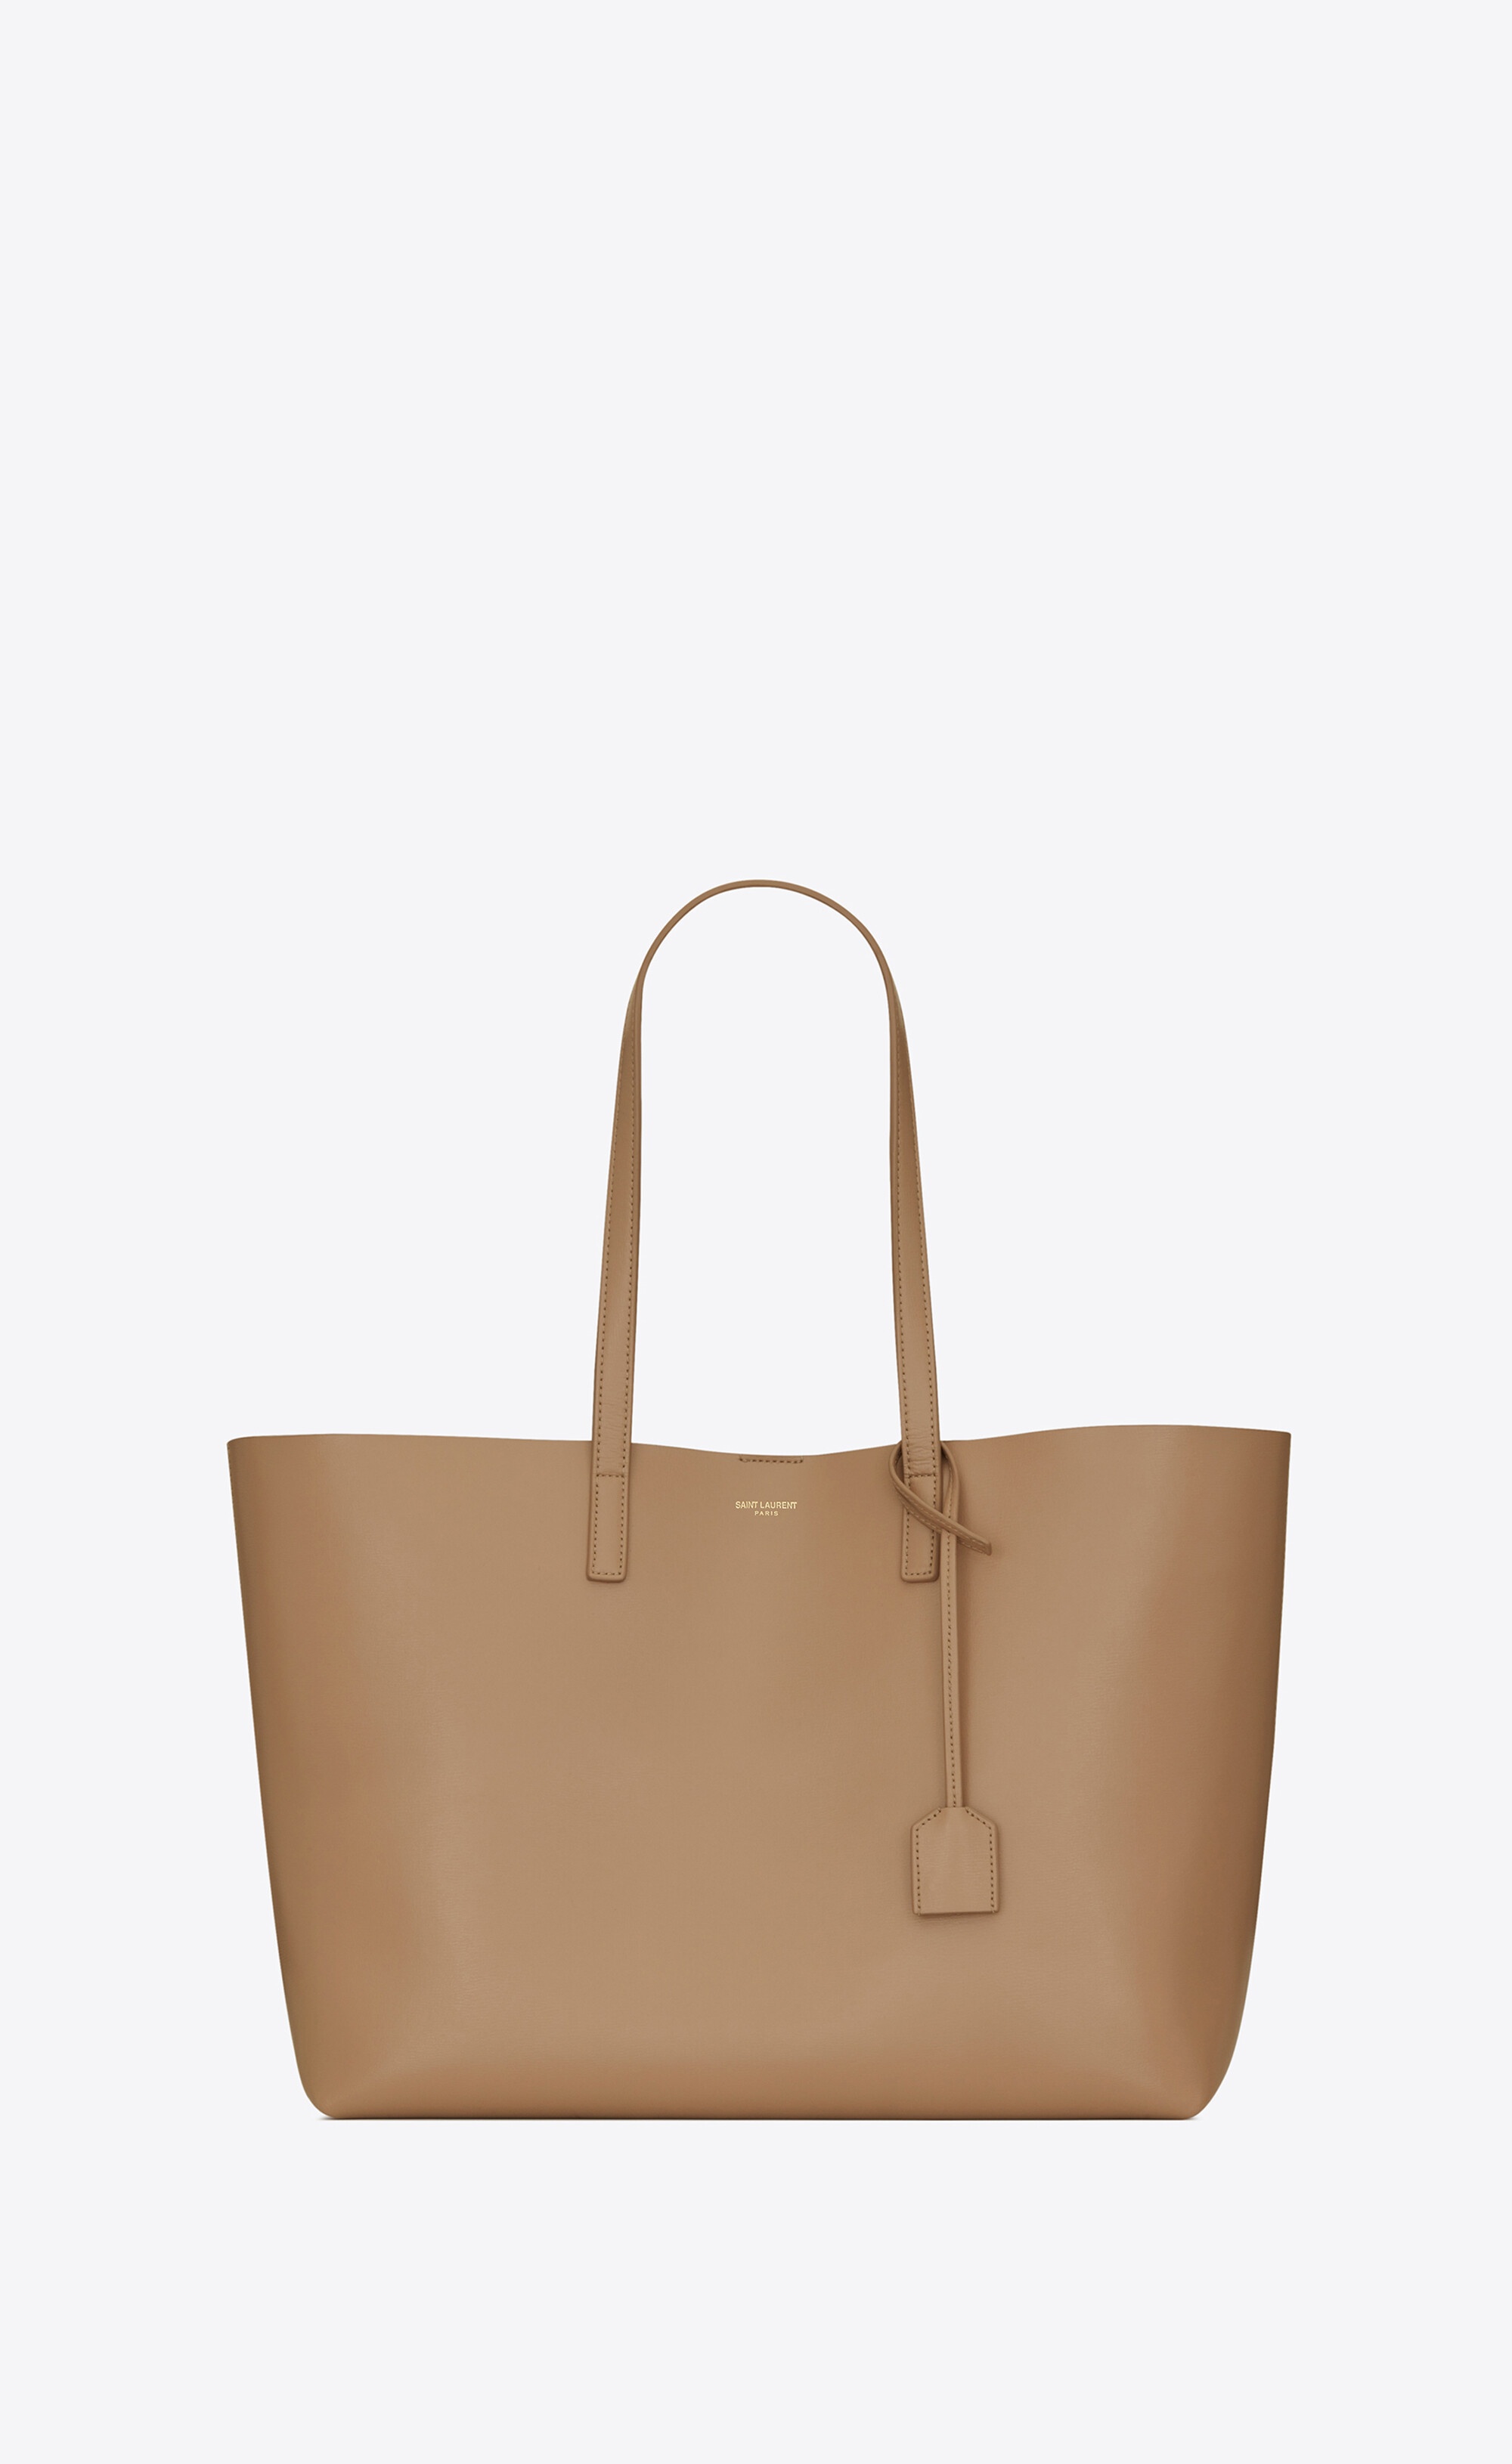 shopping bag saint laurent e/w in supple leather - 1